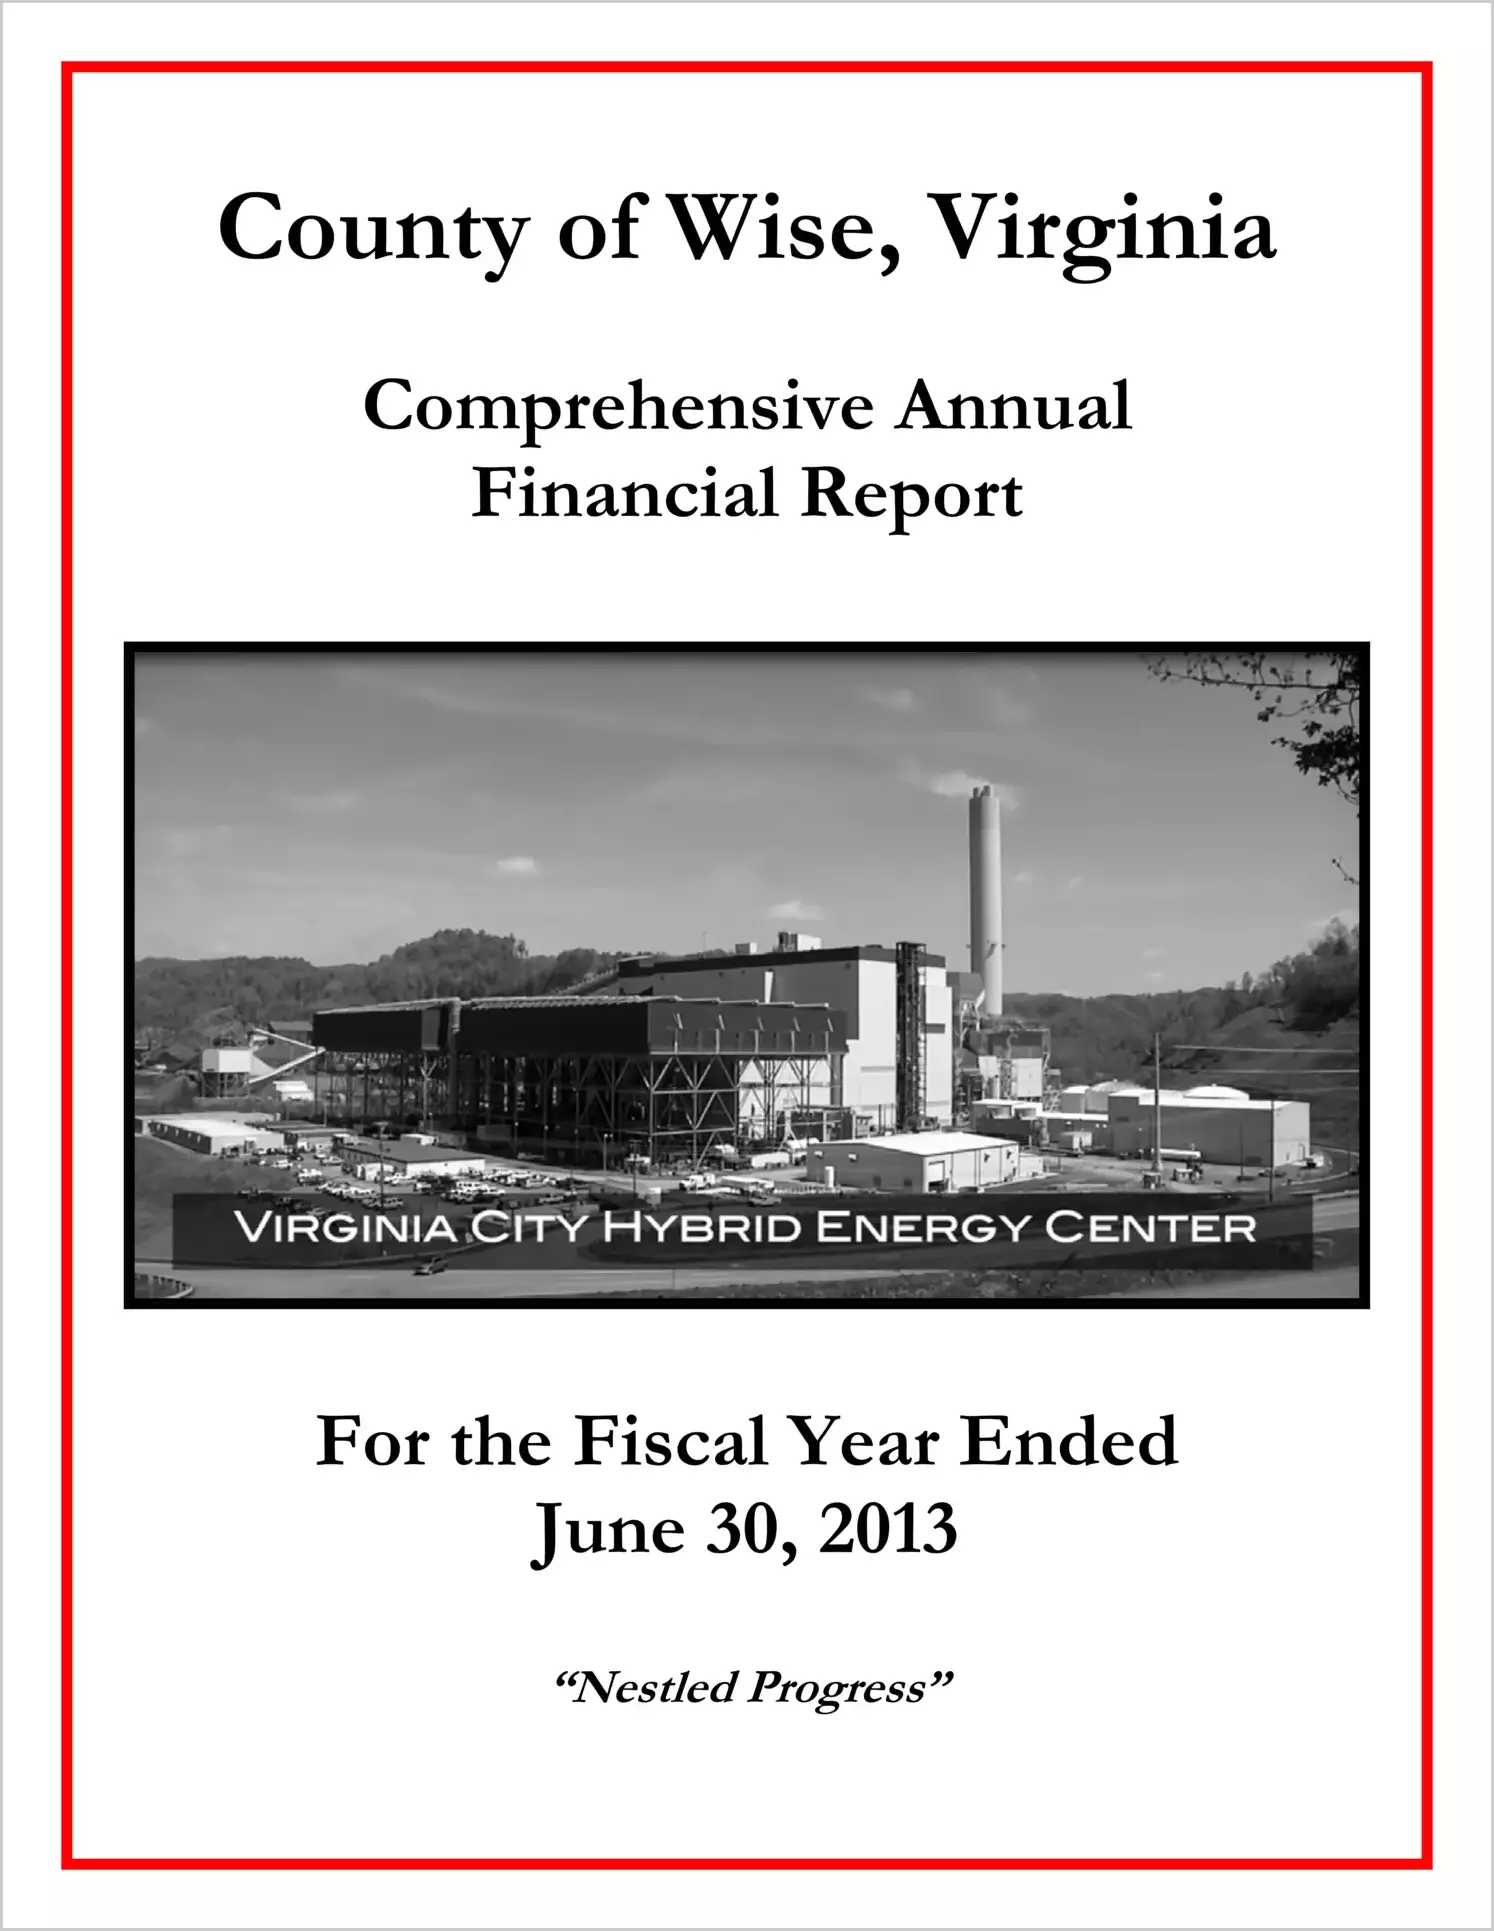 2013 Annual Financial Report for County of Wise